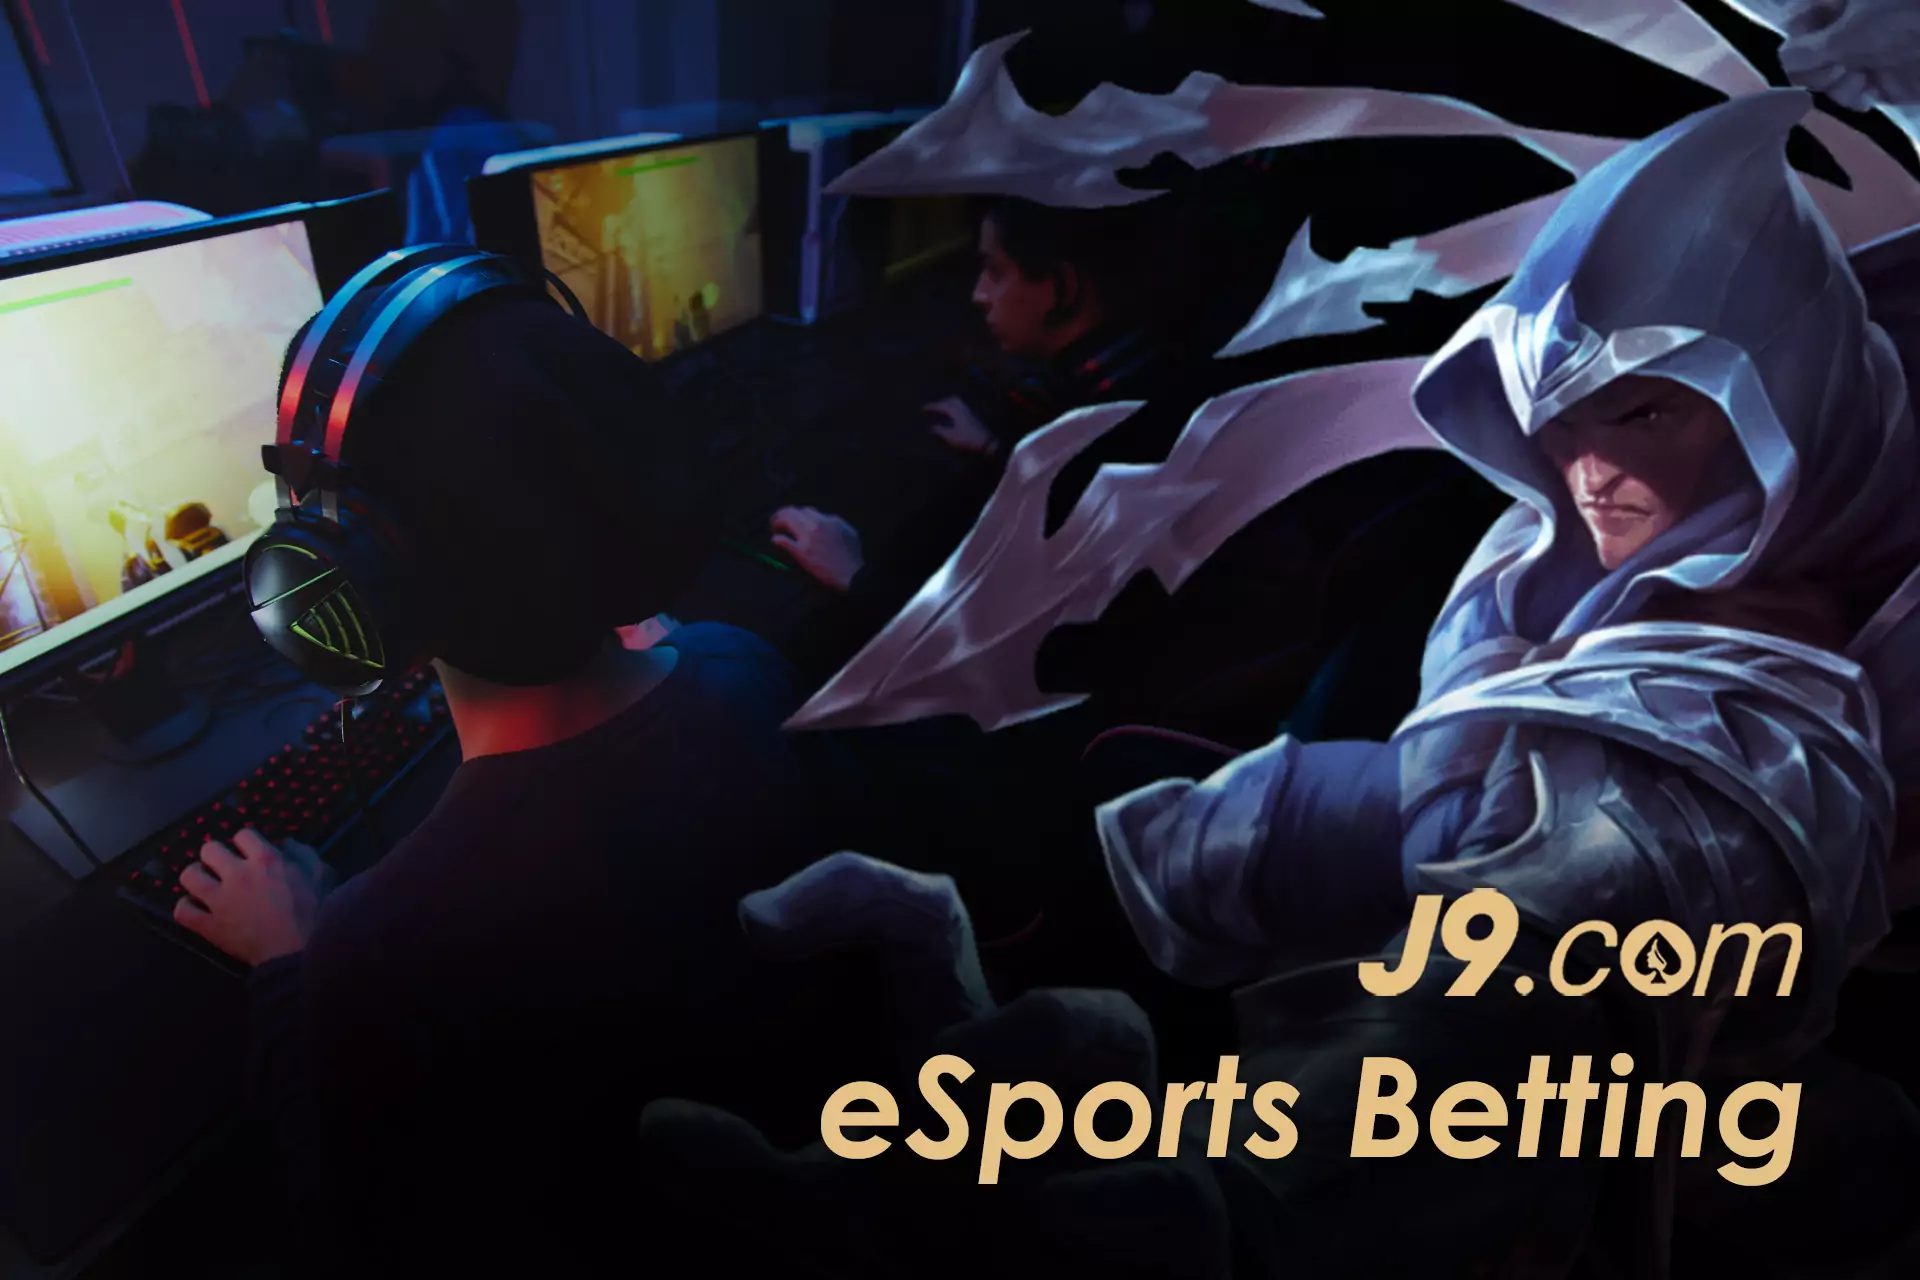 At J9.com you can place bets on your favorite championships in cybersports.